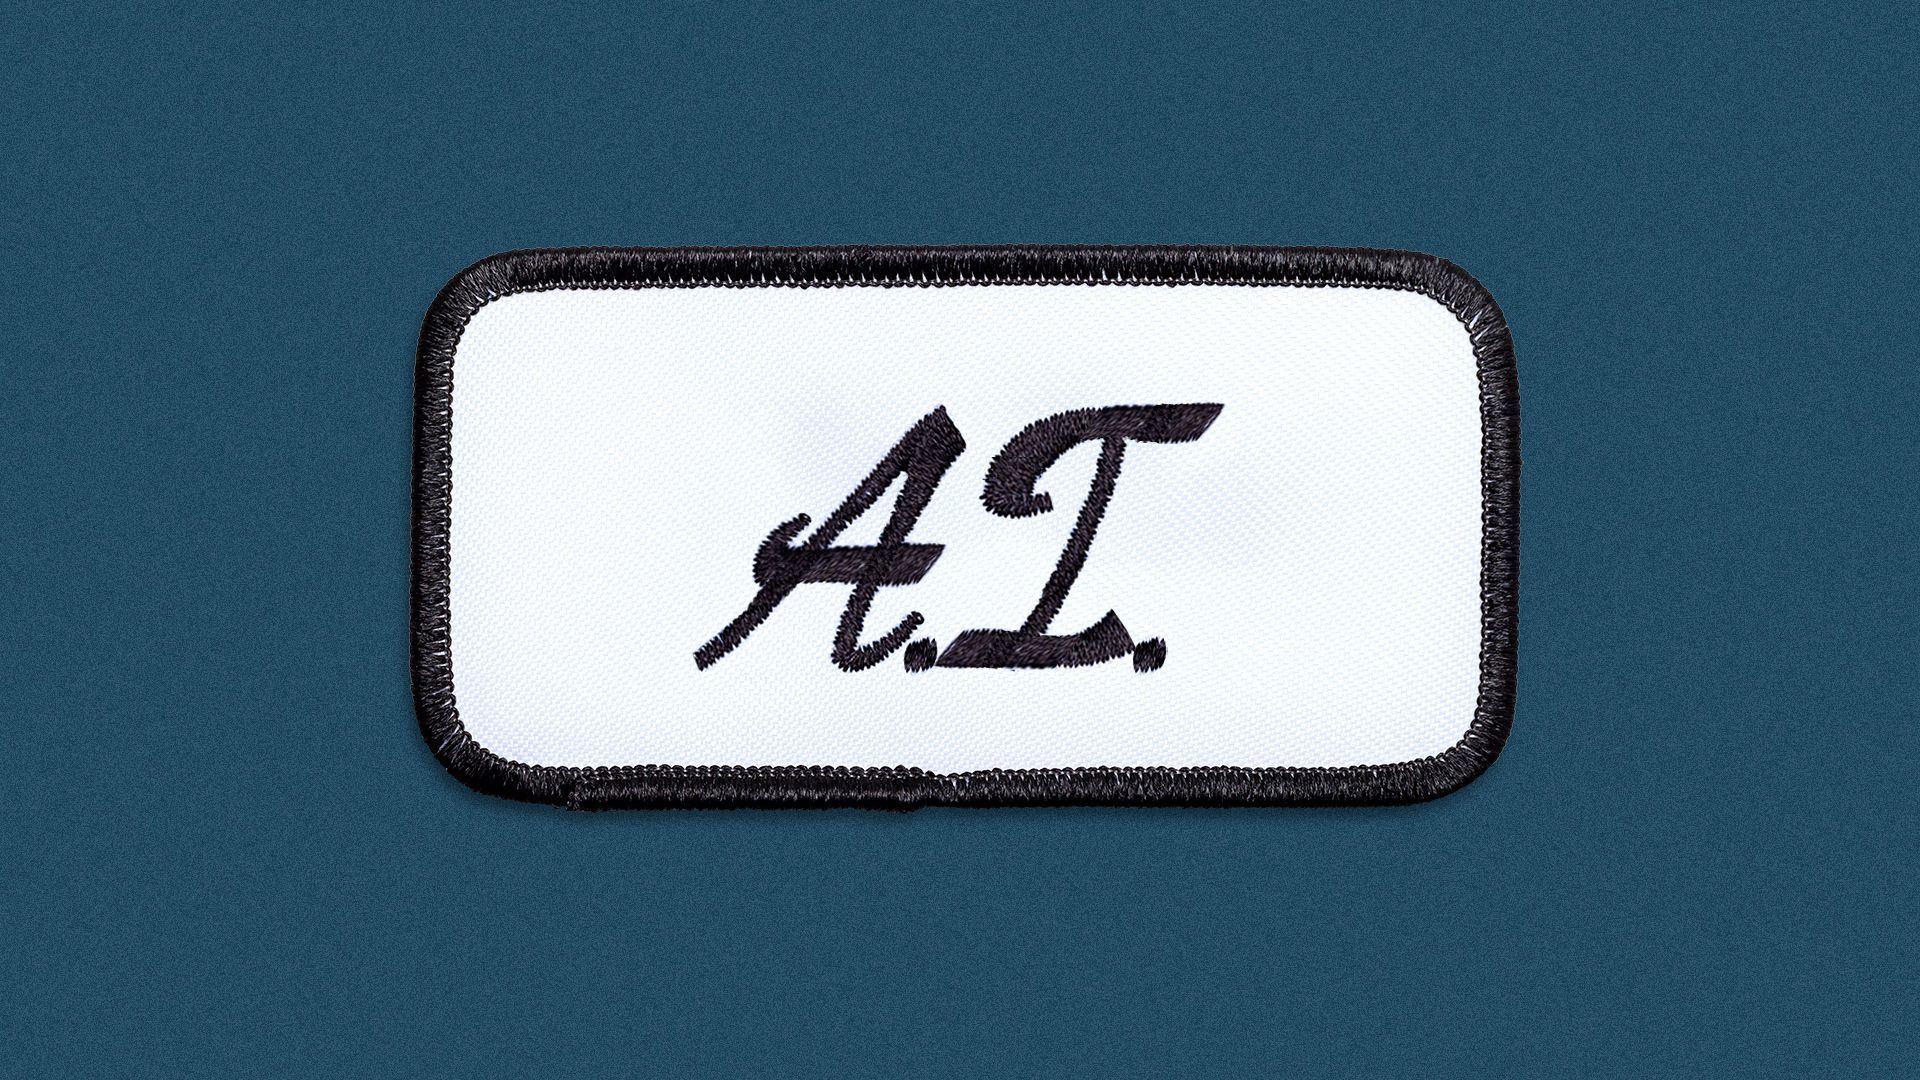 Illustration of a uniform name patch with the letters 